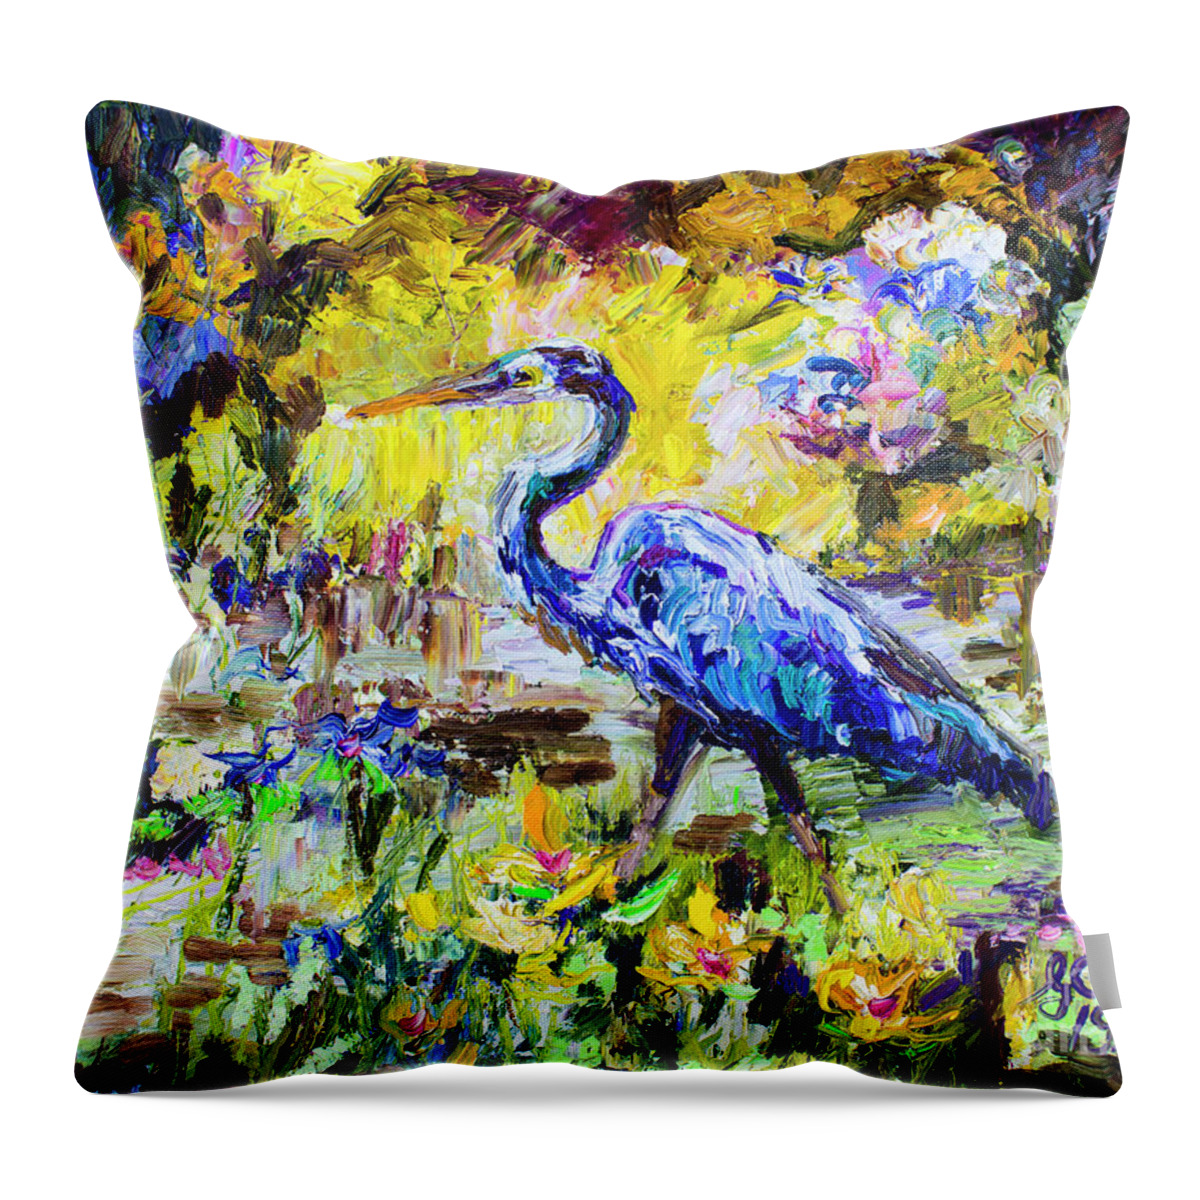 Birds Throw Pillow featuring the painting Blue Heron Wetland Magic Palette Knife Oil Painting by Ginette Callaway